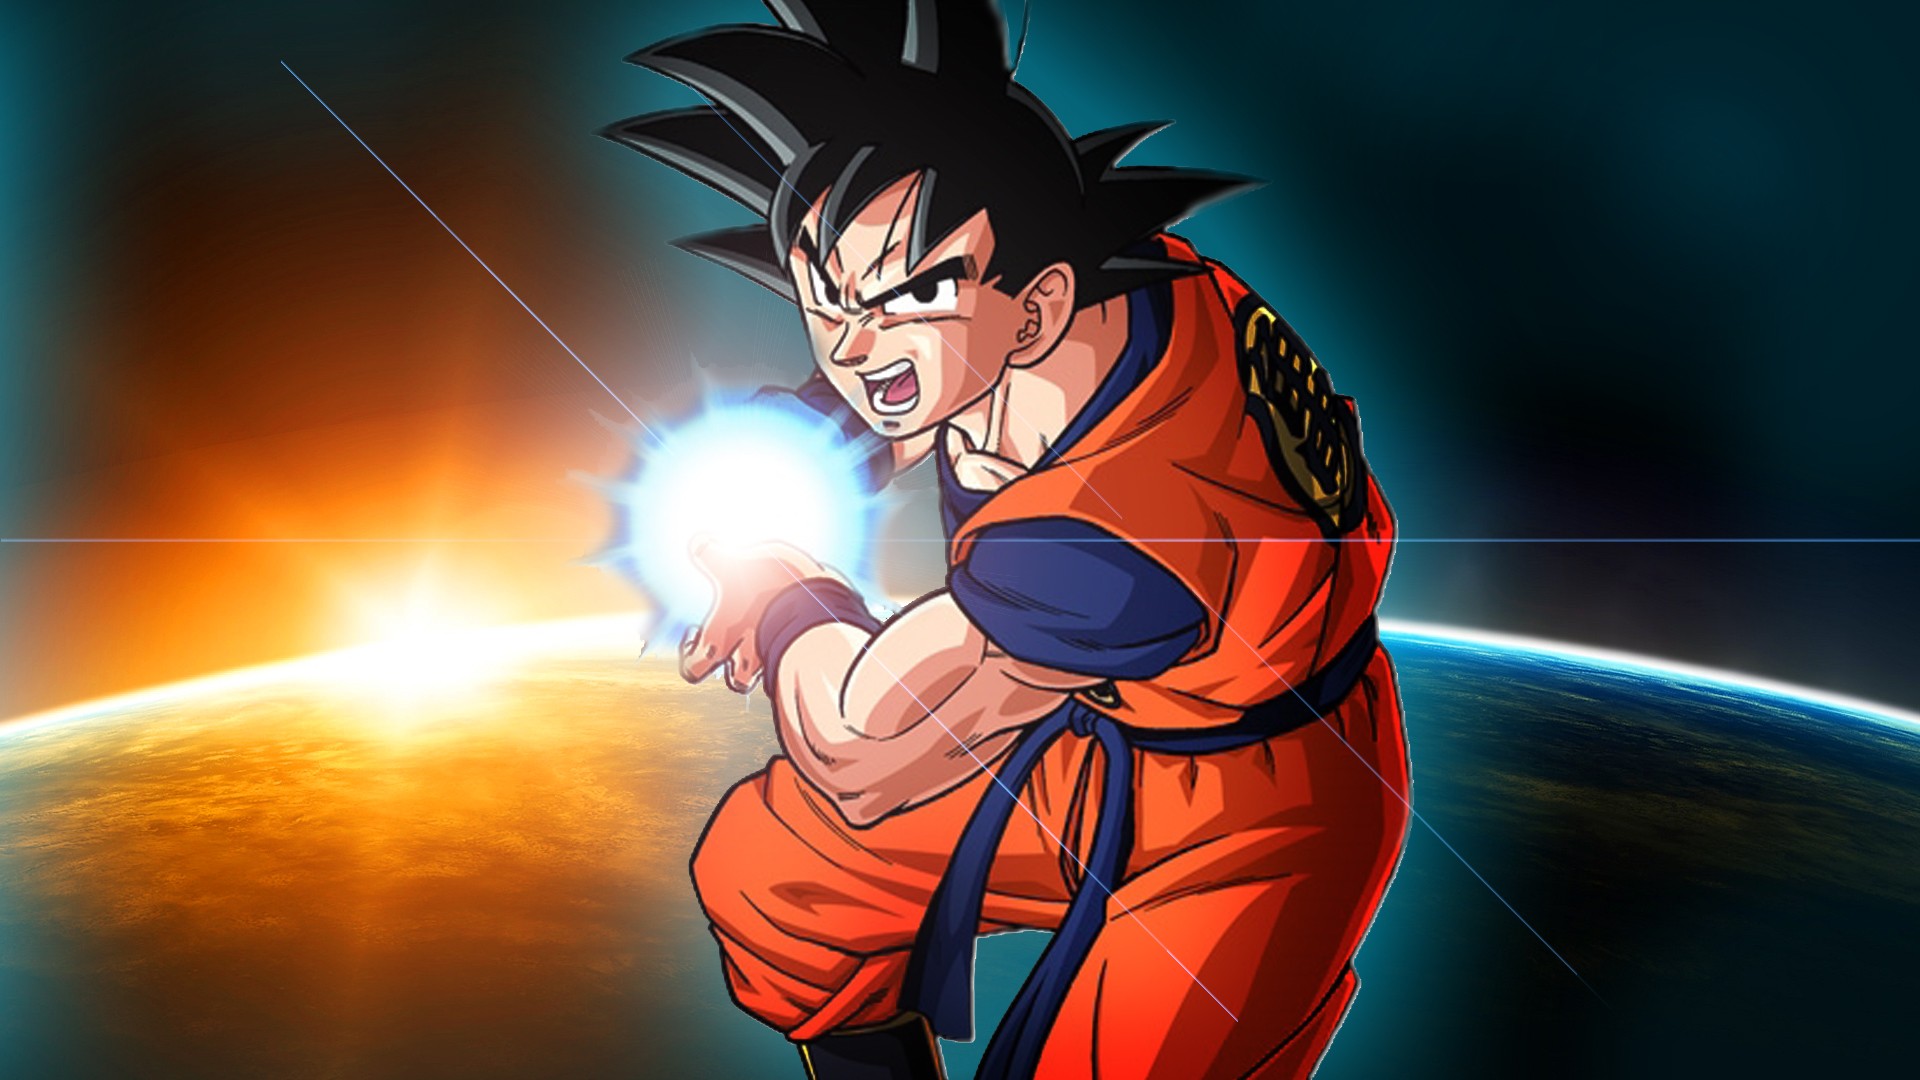 Dragon Ball Z 3D Wallpapers (39 Wallpapers) | Adorable Wallpapers